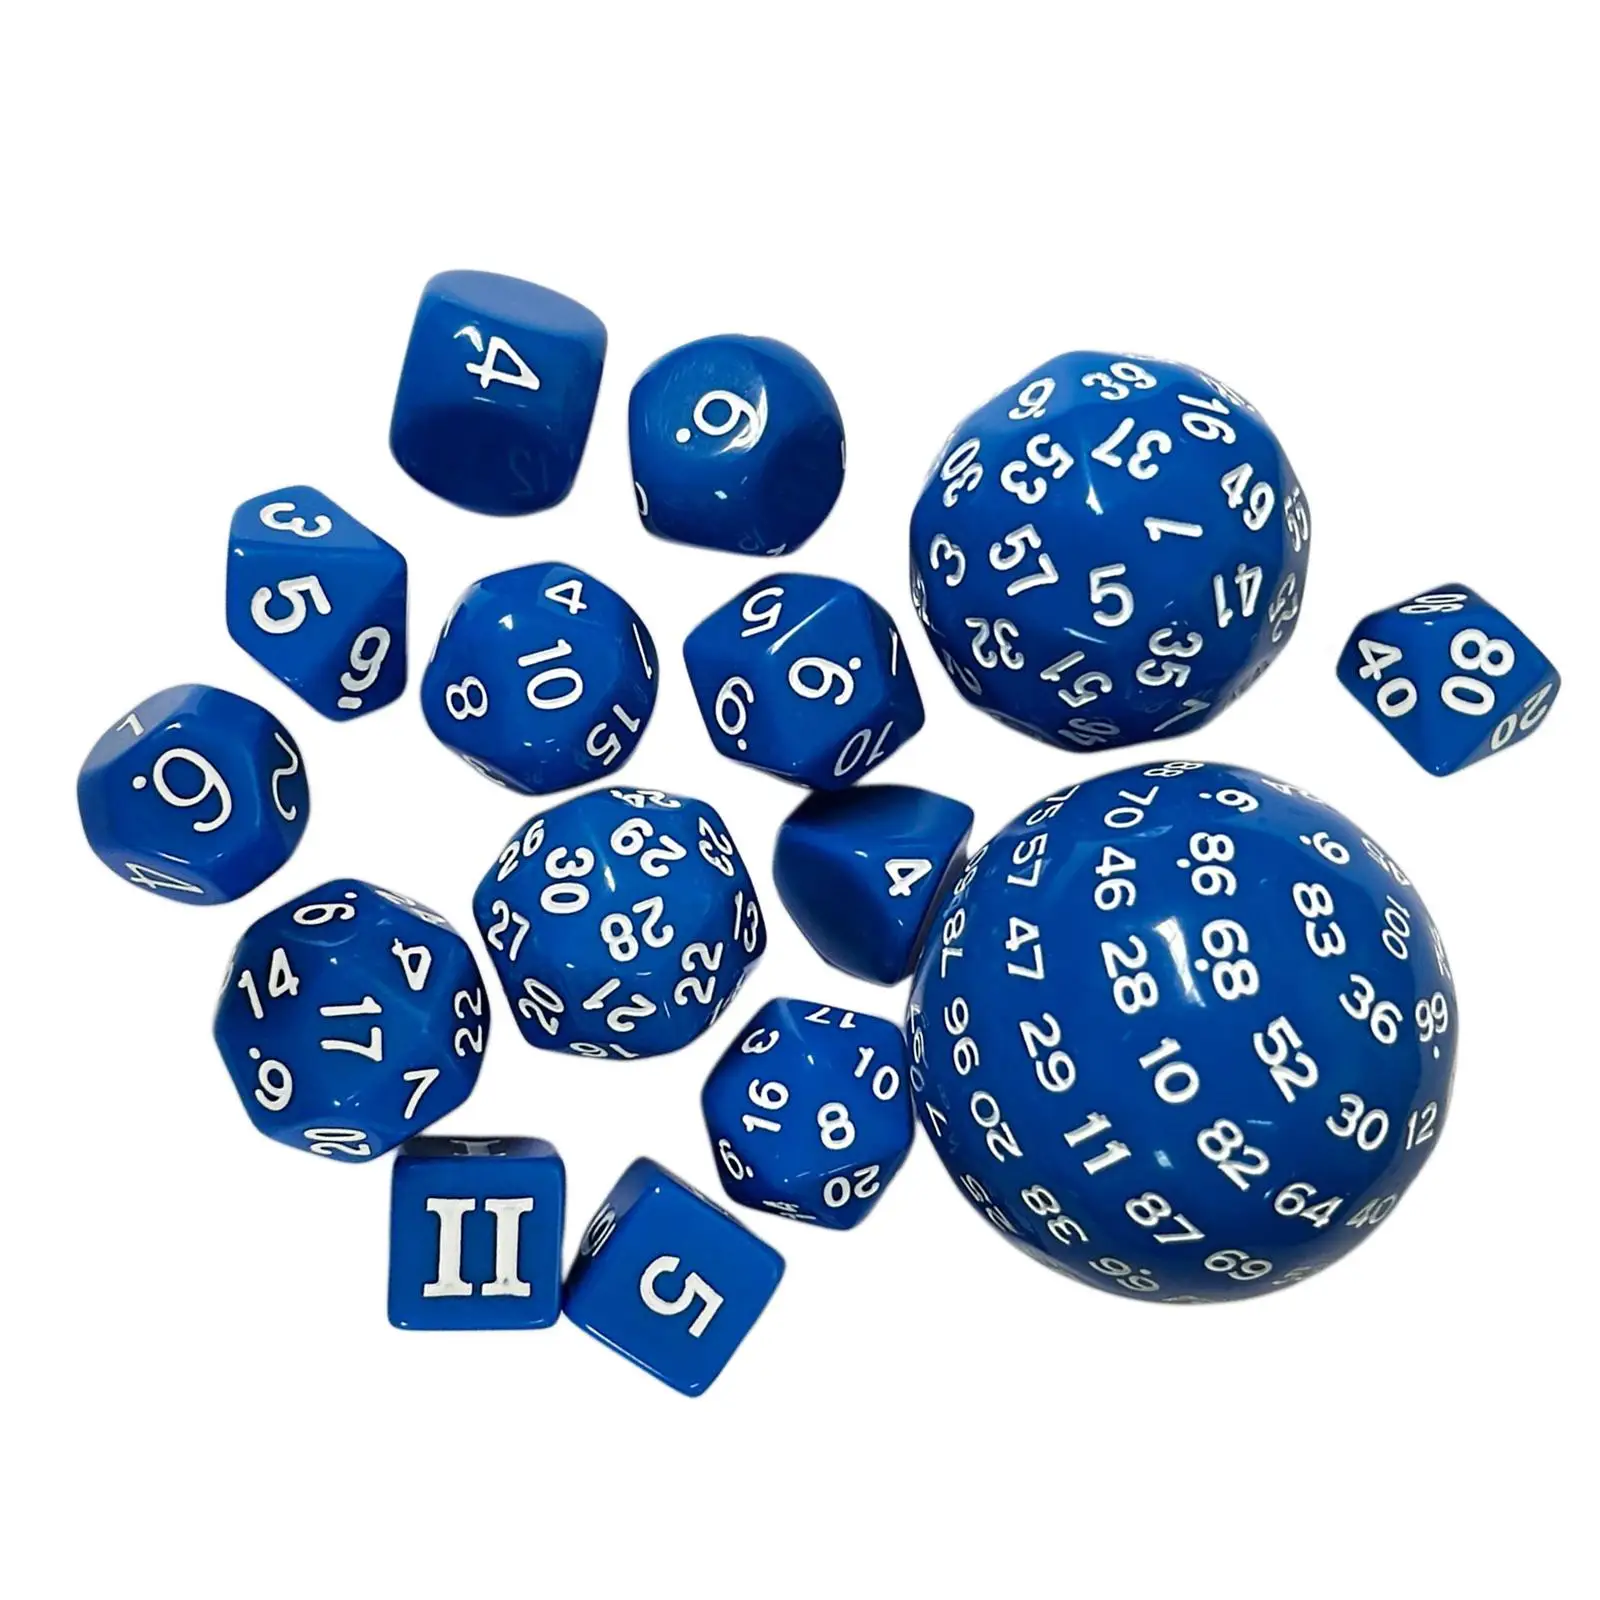 15x Dice Set D60 D30 D24 D20 D16 D12 D10 D8 D7 D5 D4 RPG Role Playing Acrylic Polyhedral Dice Set for Entertainment